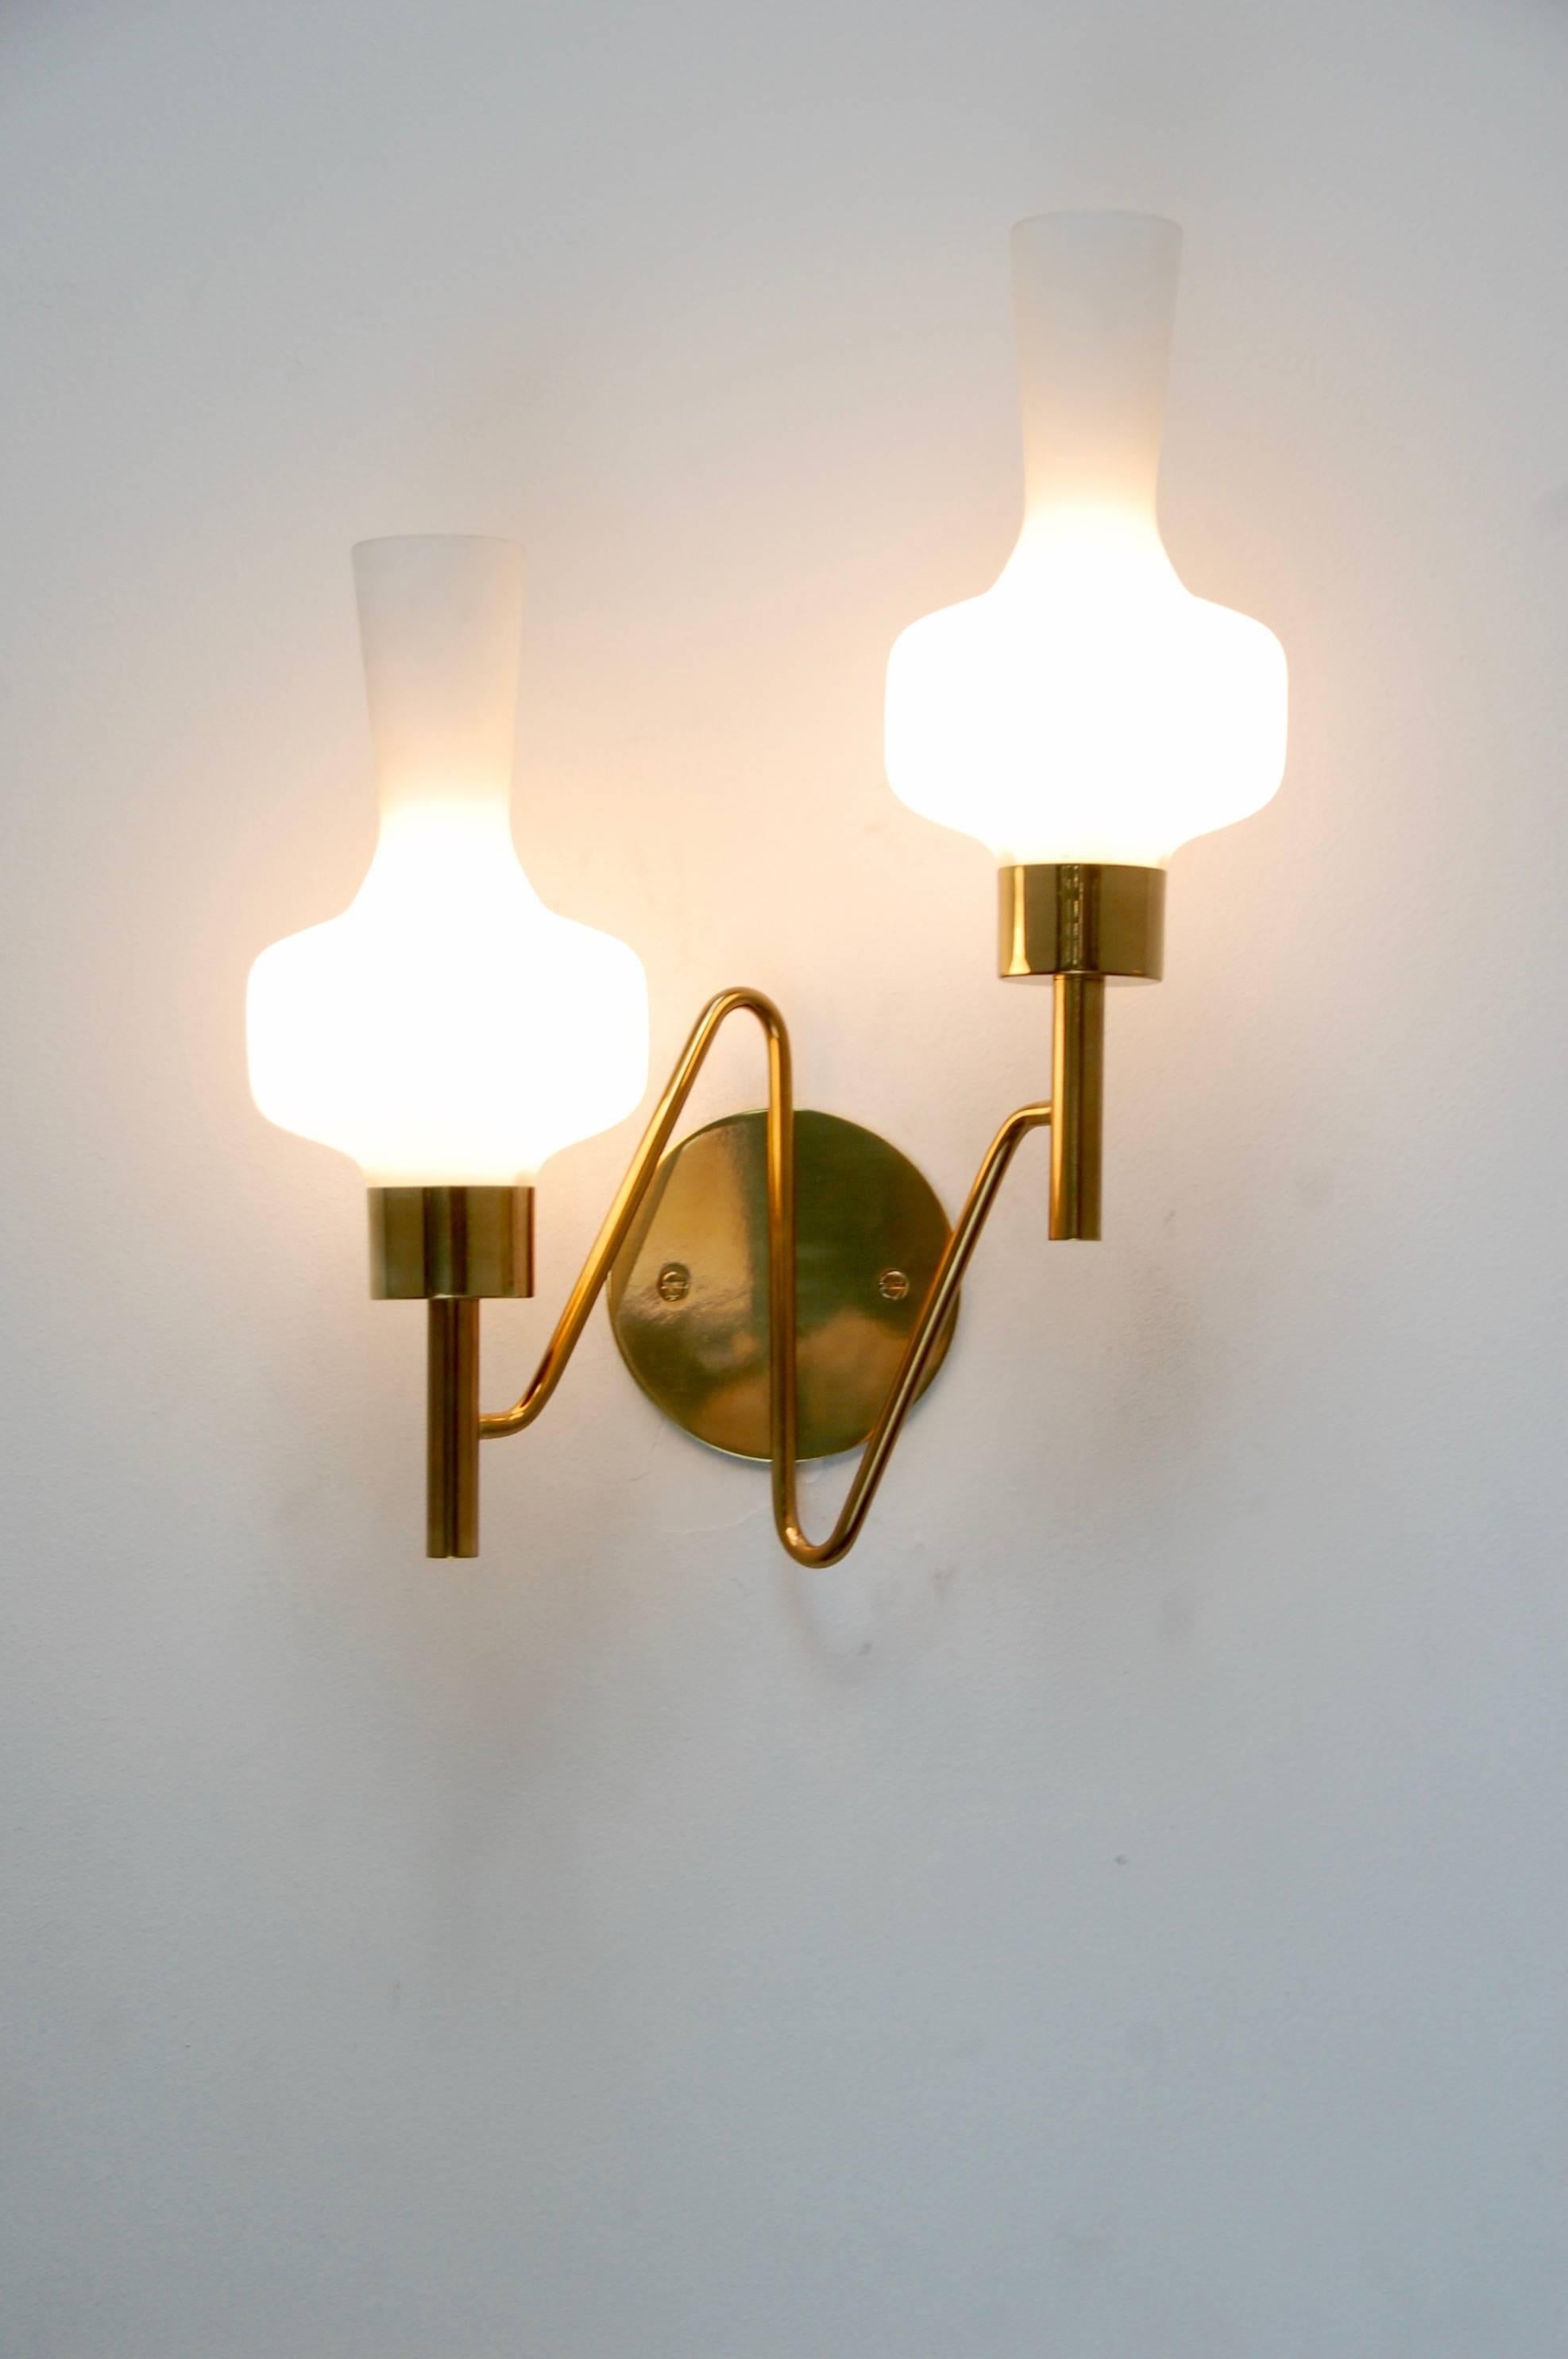 Single brass and glass double shade sconce from Mid-Century, Italy. Single E12 based socket per shade. Ready for use in the US.